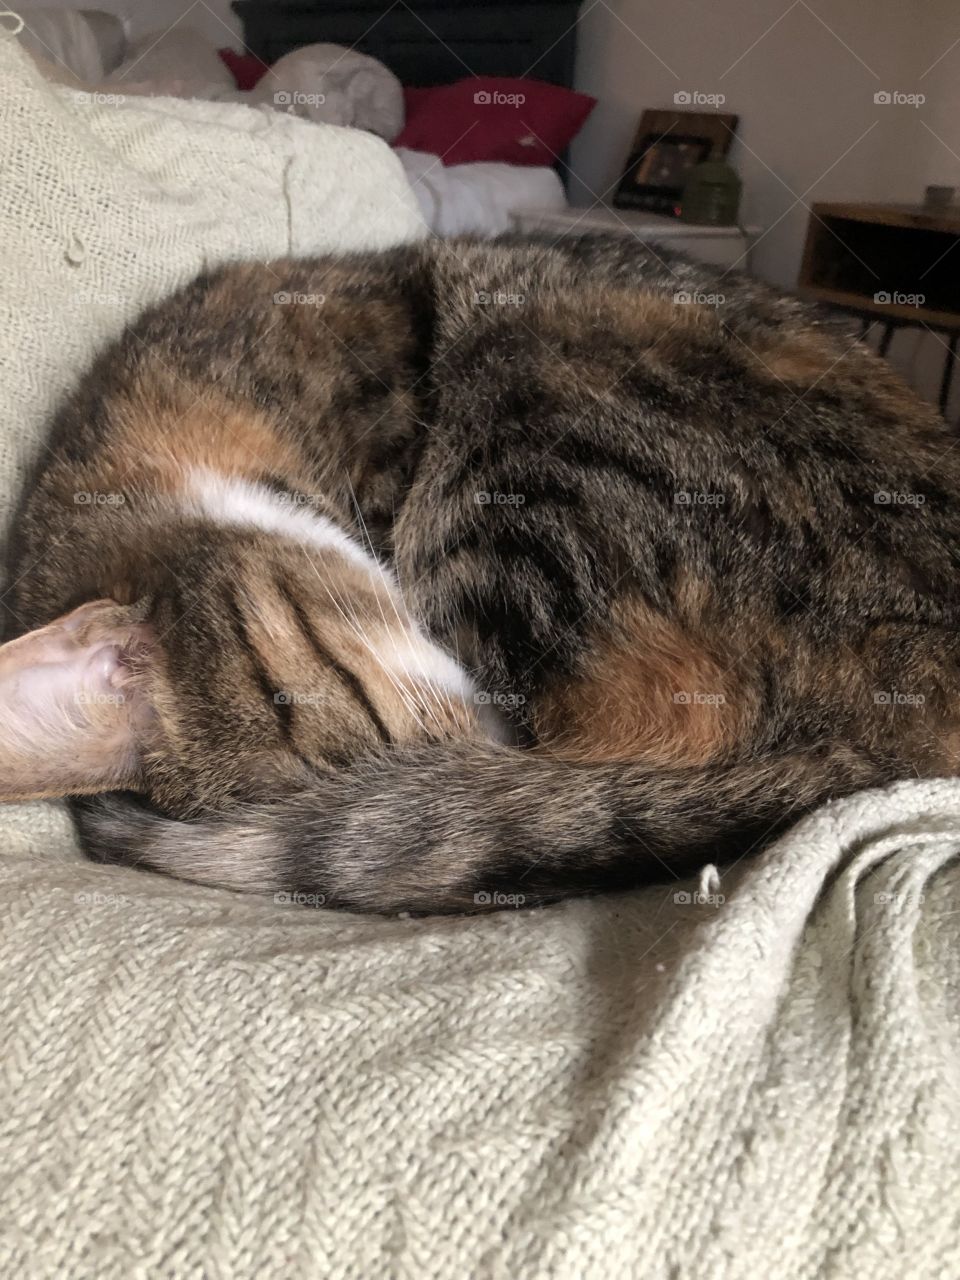 Curled up tight for a warm nap 